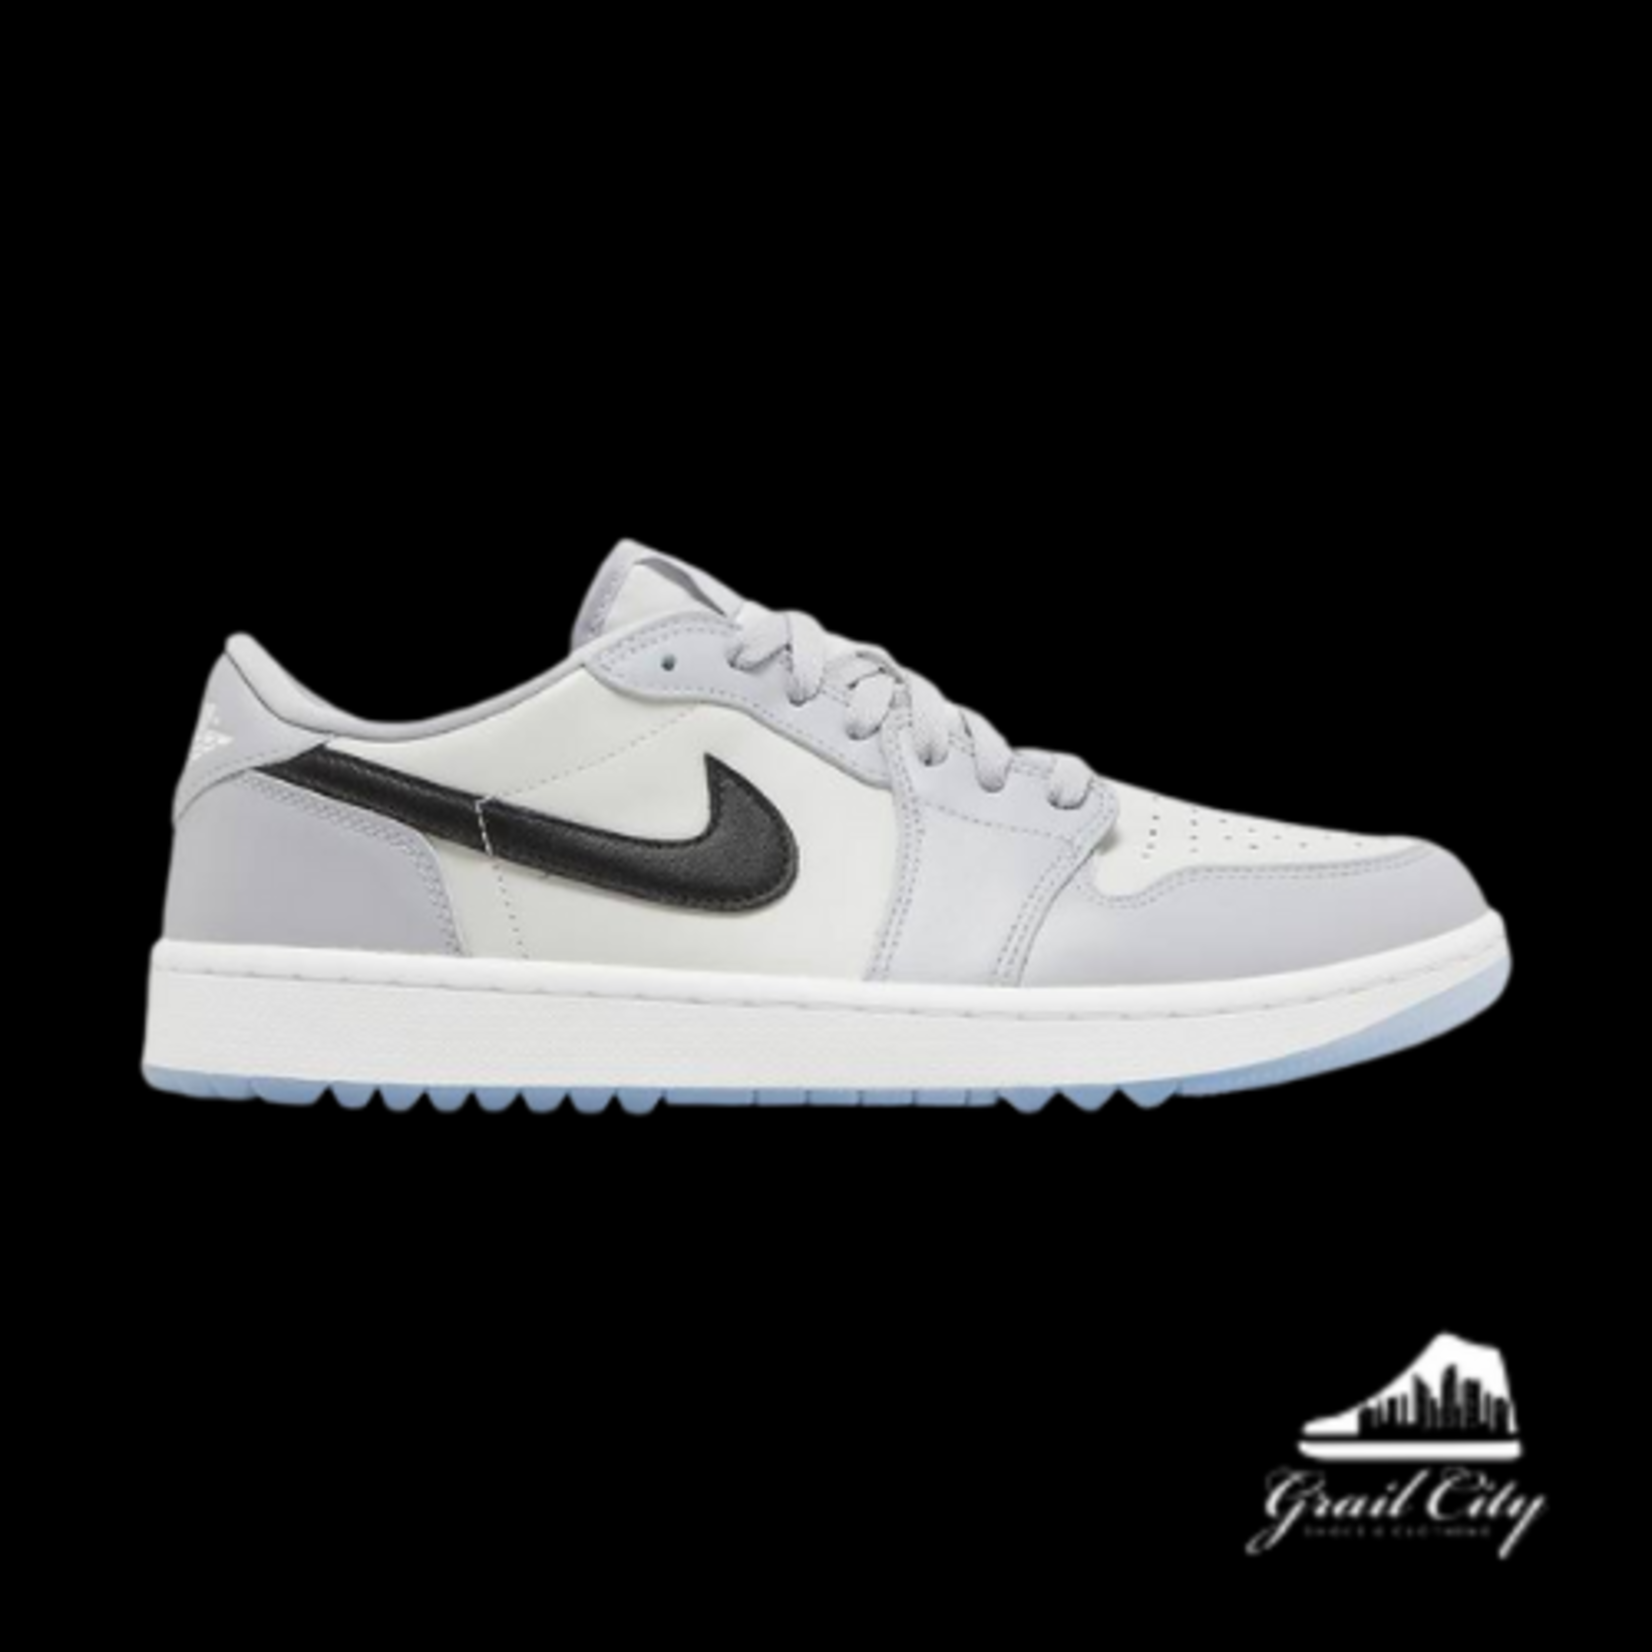 Jordan 1 Low Golf 'Wolf Grey' - Grail City Shoes and Clothing